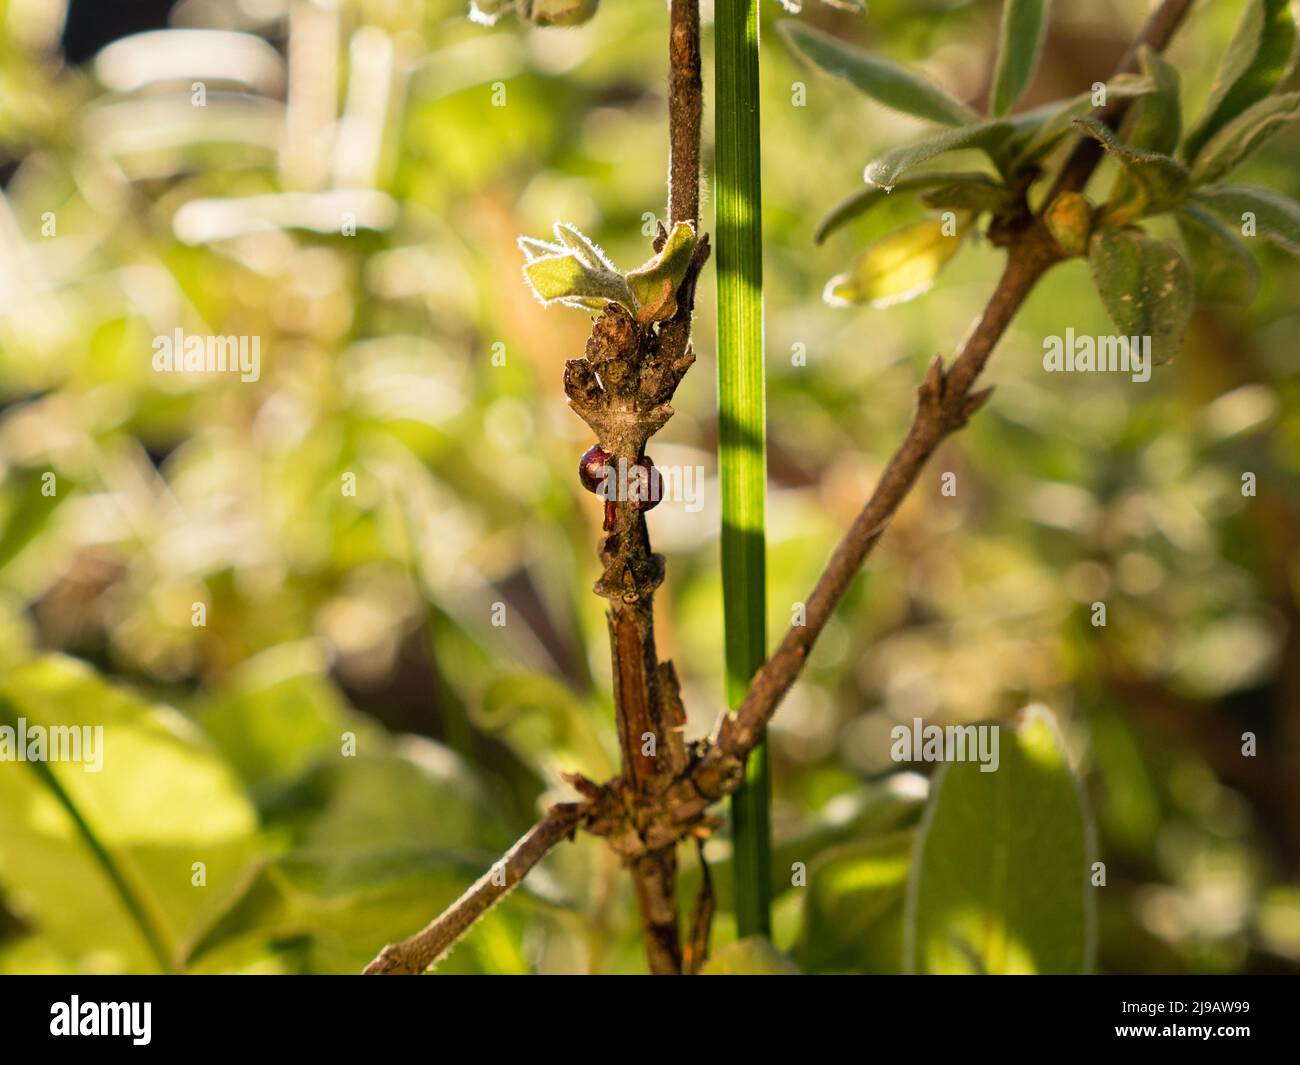 close up of scale insects on plant - garden pest Stock Photo